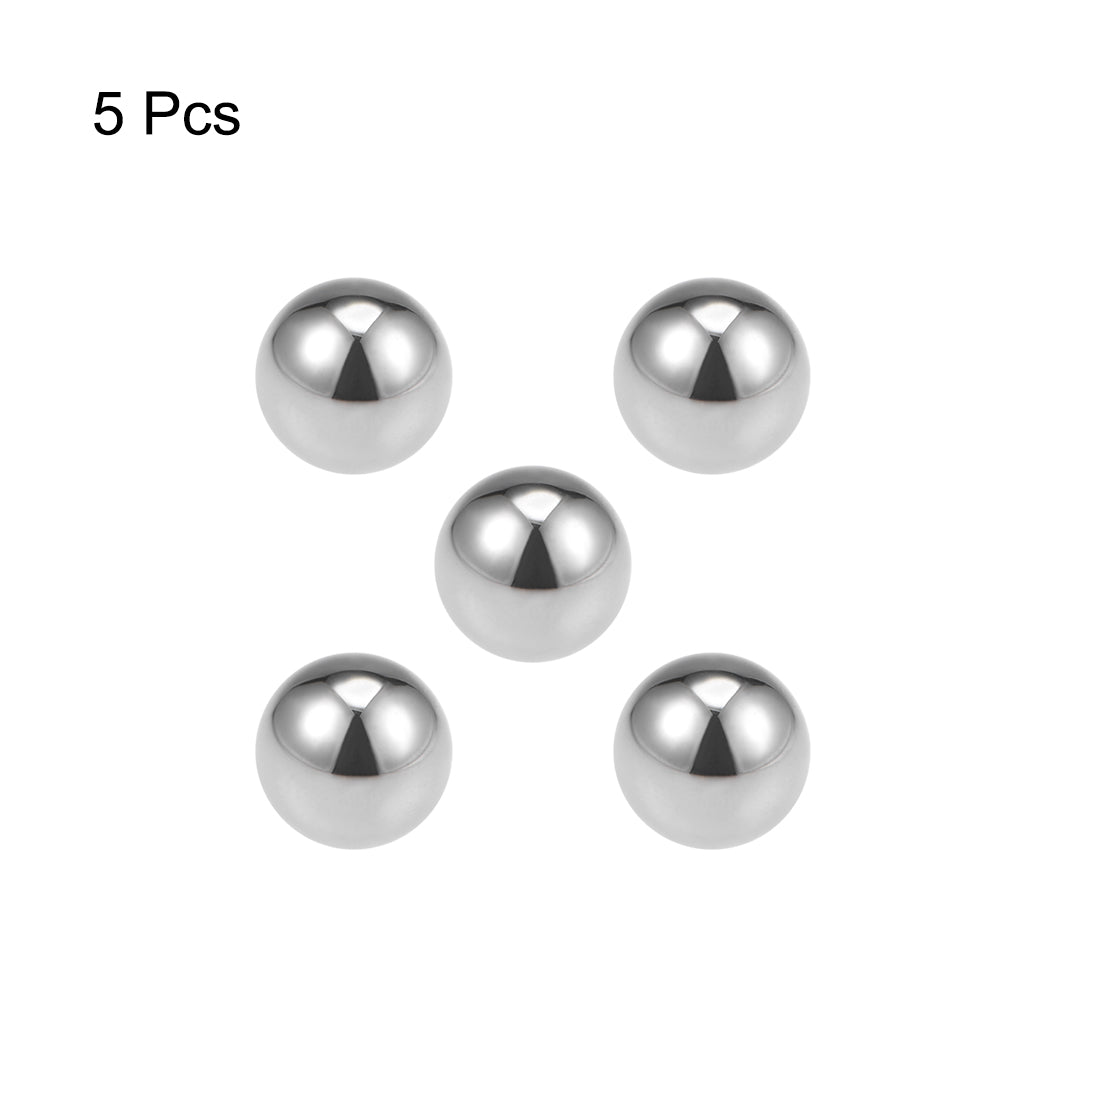 Uxcell Uxcell Bearing Balls 5/8-inch 304 Stainless Steel G100 Precision 5pcs